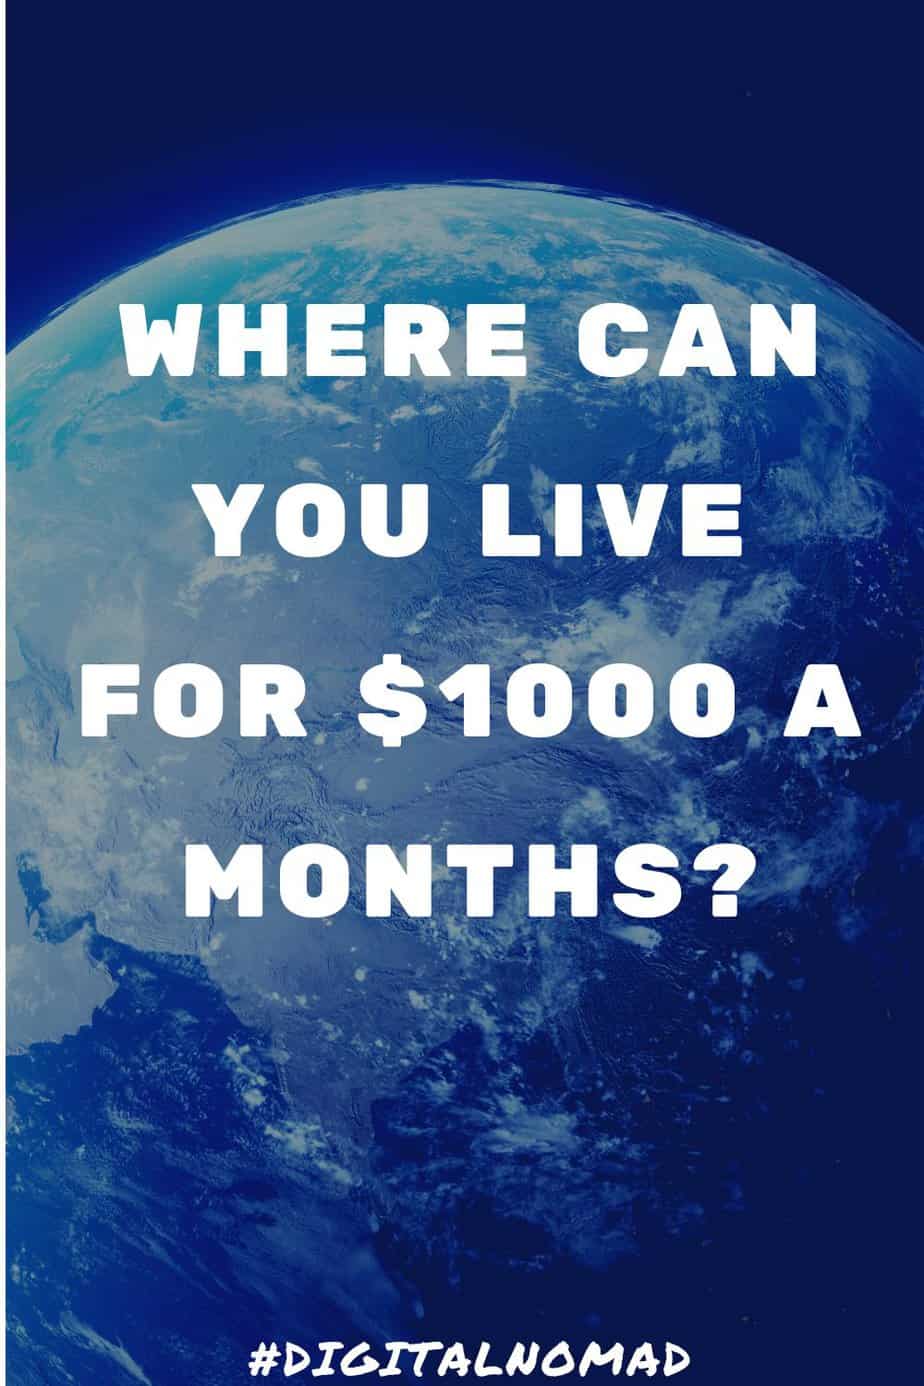 Where in the world can you live for 1000 a month?